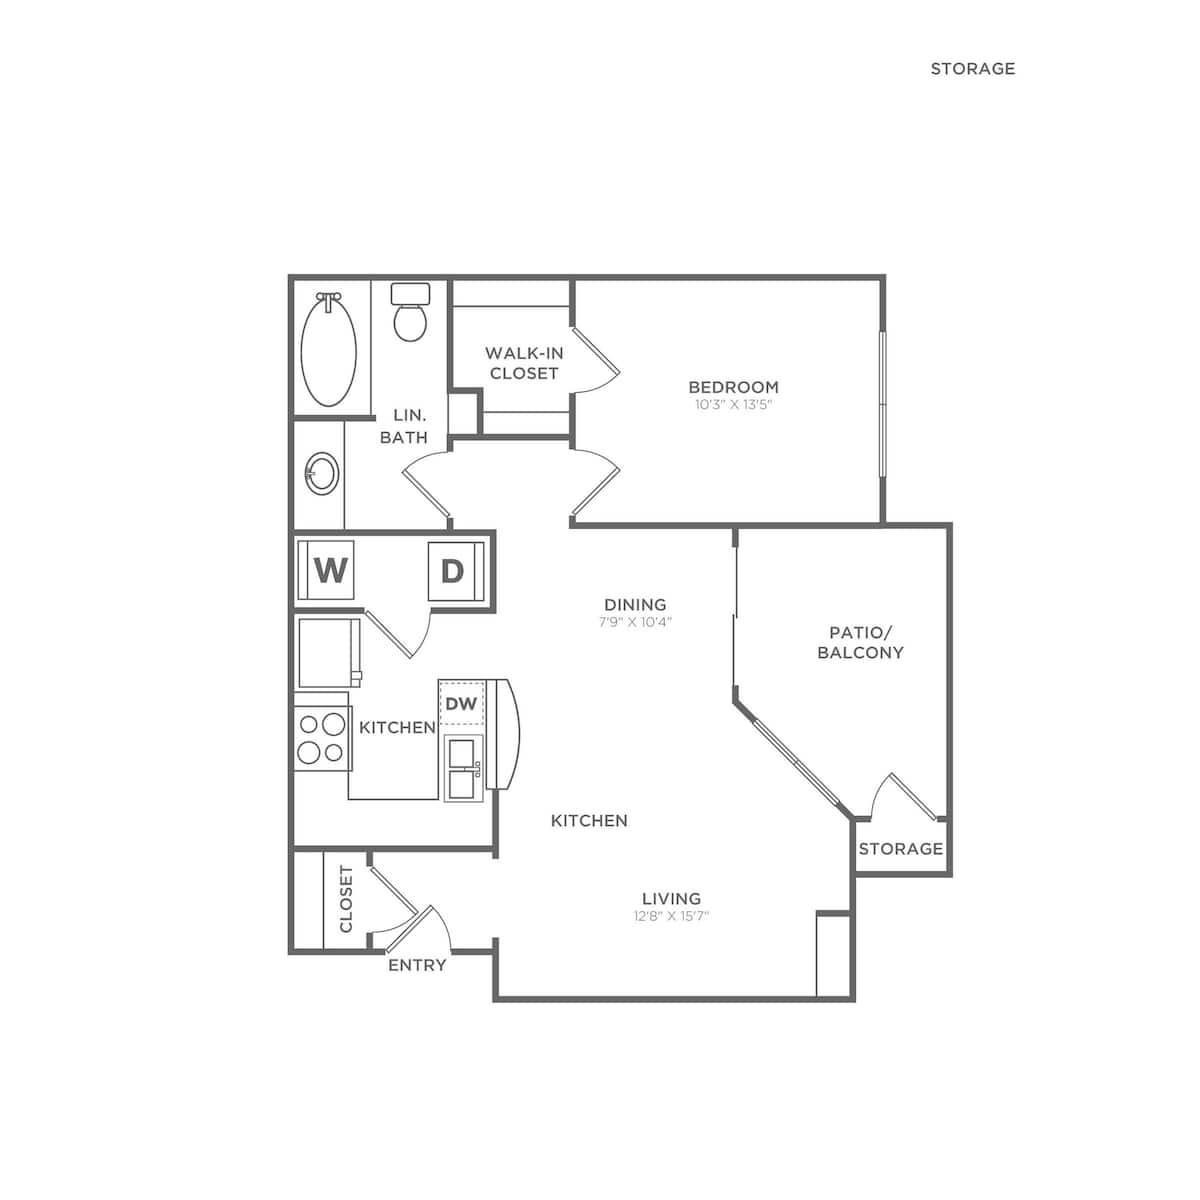 Floorplan diagram for A1-Sophisticated, showing 1 bedroom